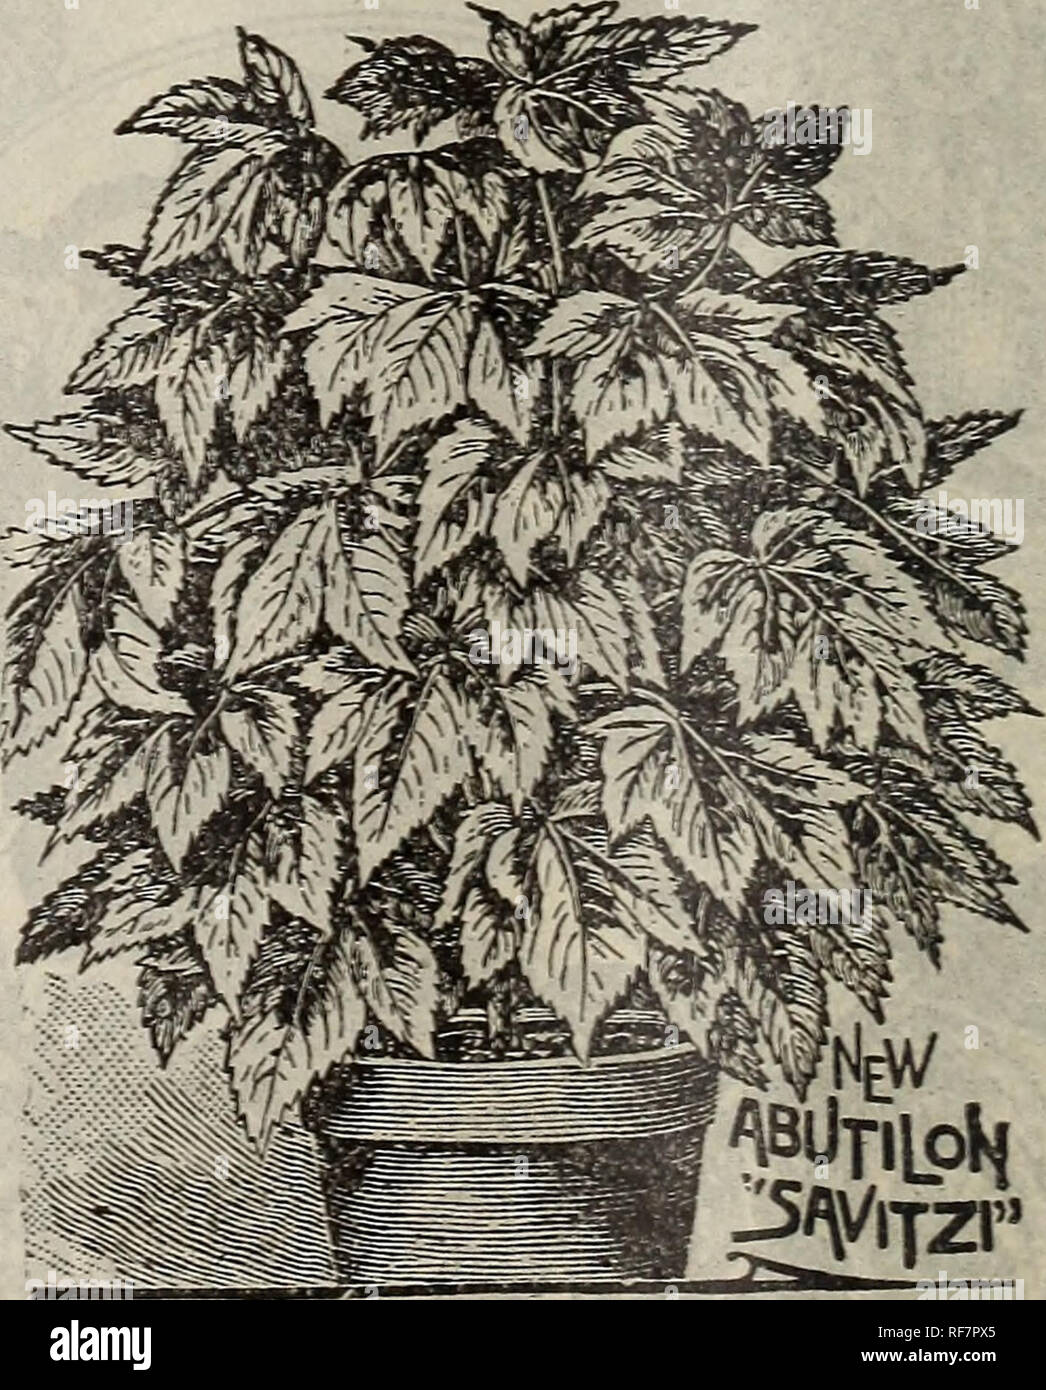 . Cottage Rose Garden : 1901. Nursery stock Ohio Columbus Catalogs; Flowers Catalogs; Ornamental shrubs Catalogs; Plants, Ornamental Catalogs. FARFUG1UM GRASDE. FARGUGIUM GRANDE. BY SOME CALLED &quot;LEOPARD PLANT. A C'ALVPH A 8ANDERI. A beautiful ornamental foliage plant, either for pot col- ture or for planting in open border in a shaded position; the leaves, from eight to ten inches in diameter, are of a thick, leathery texture, dark green in color, with bright yell»w spots. Price, 25c each. BOUGAINVILLEA SANDERIANA. This beautiful free flowering variel y was introduced about three years ag Stock Photo